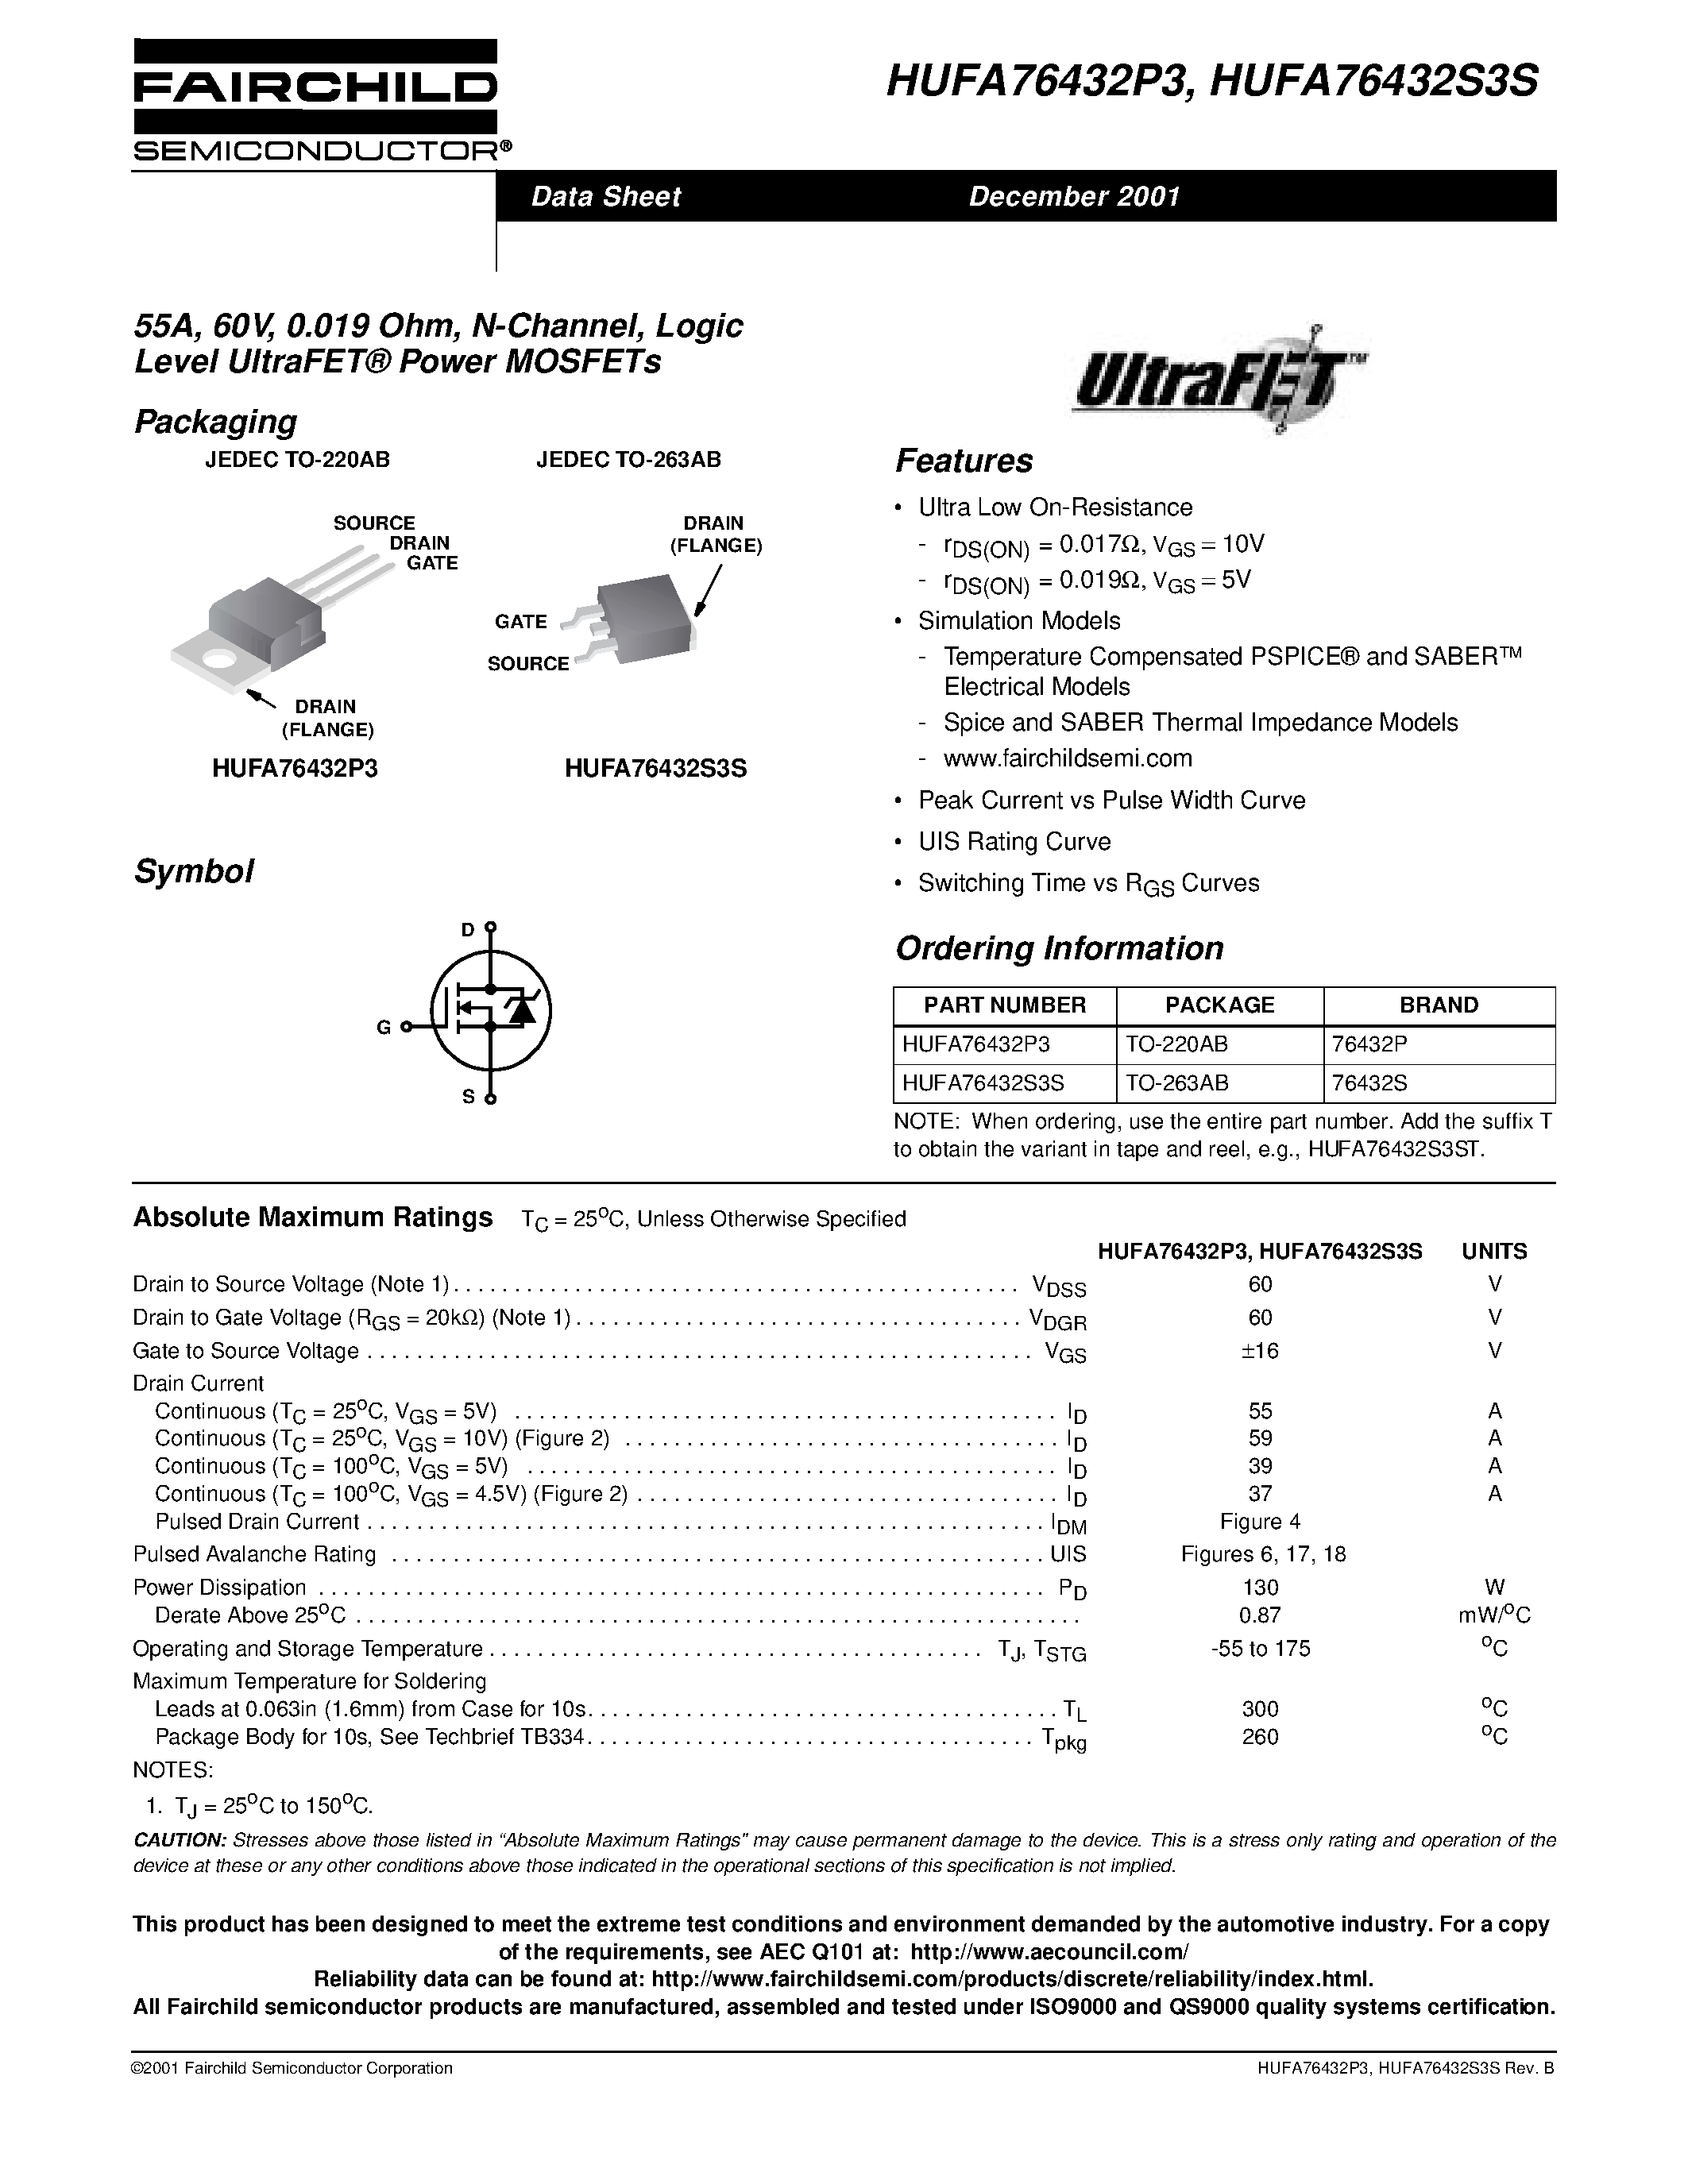 Datasheet HUFA76432S3S - 55A/ 60V/ 0.019 Ohm/ N-Channel/ Logic Level UltraFET Power MOSFETs page 1